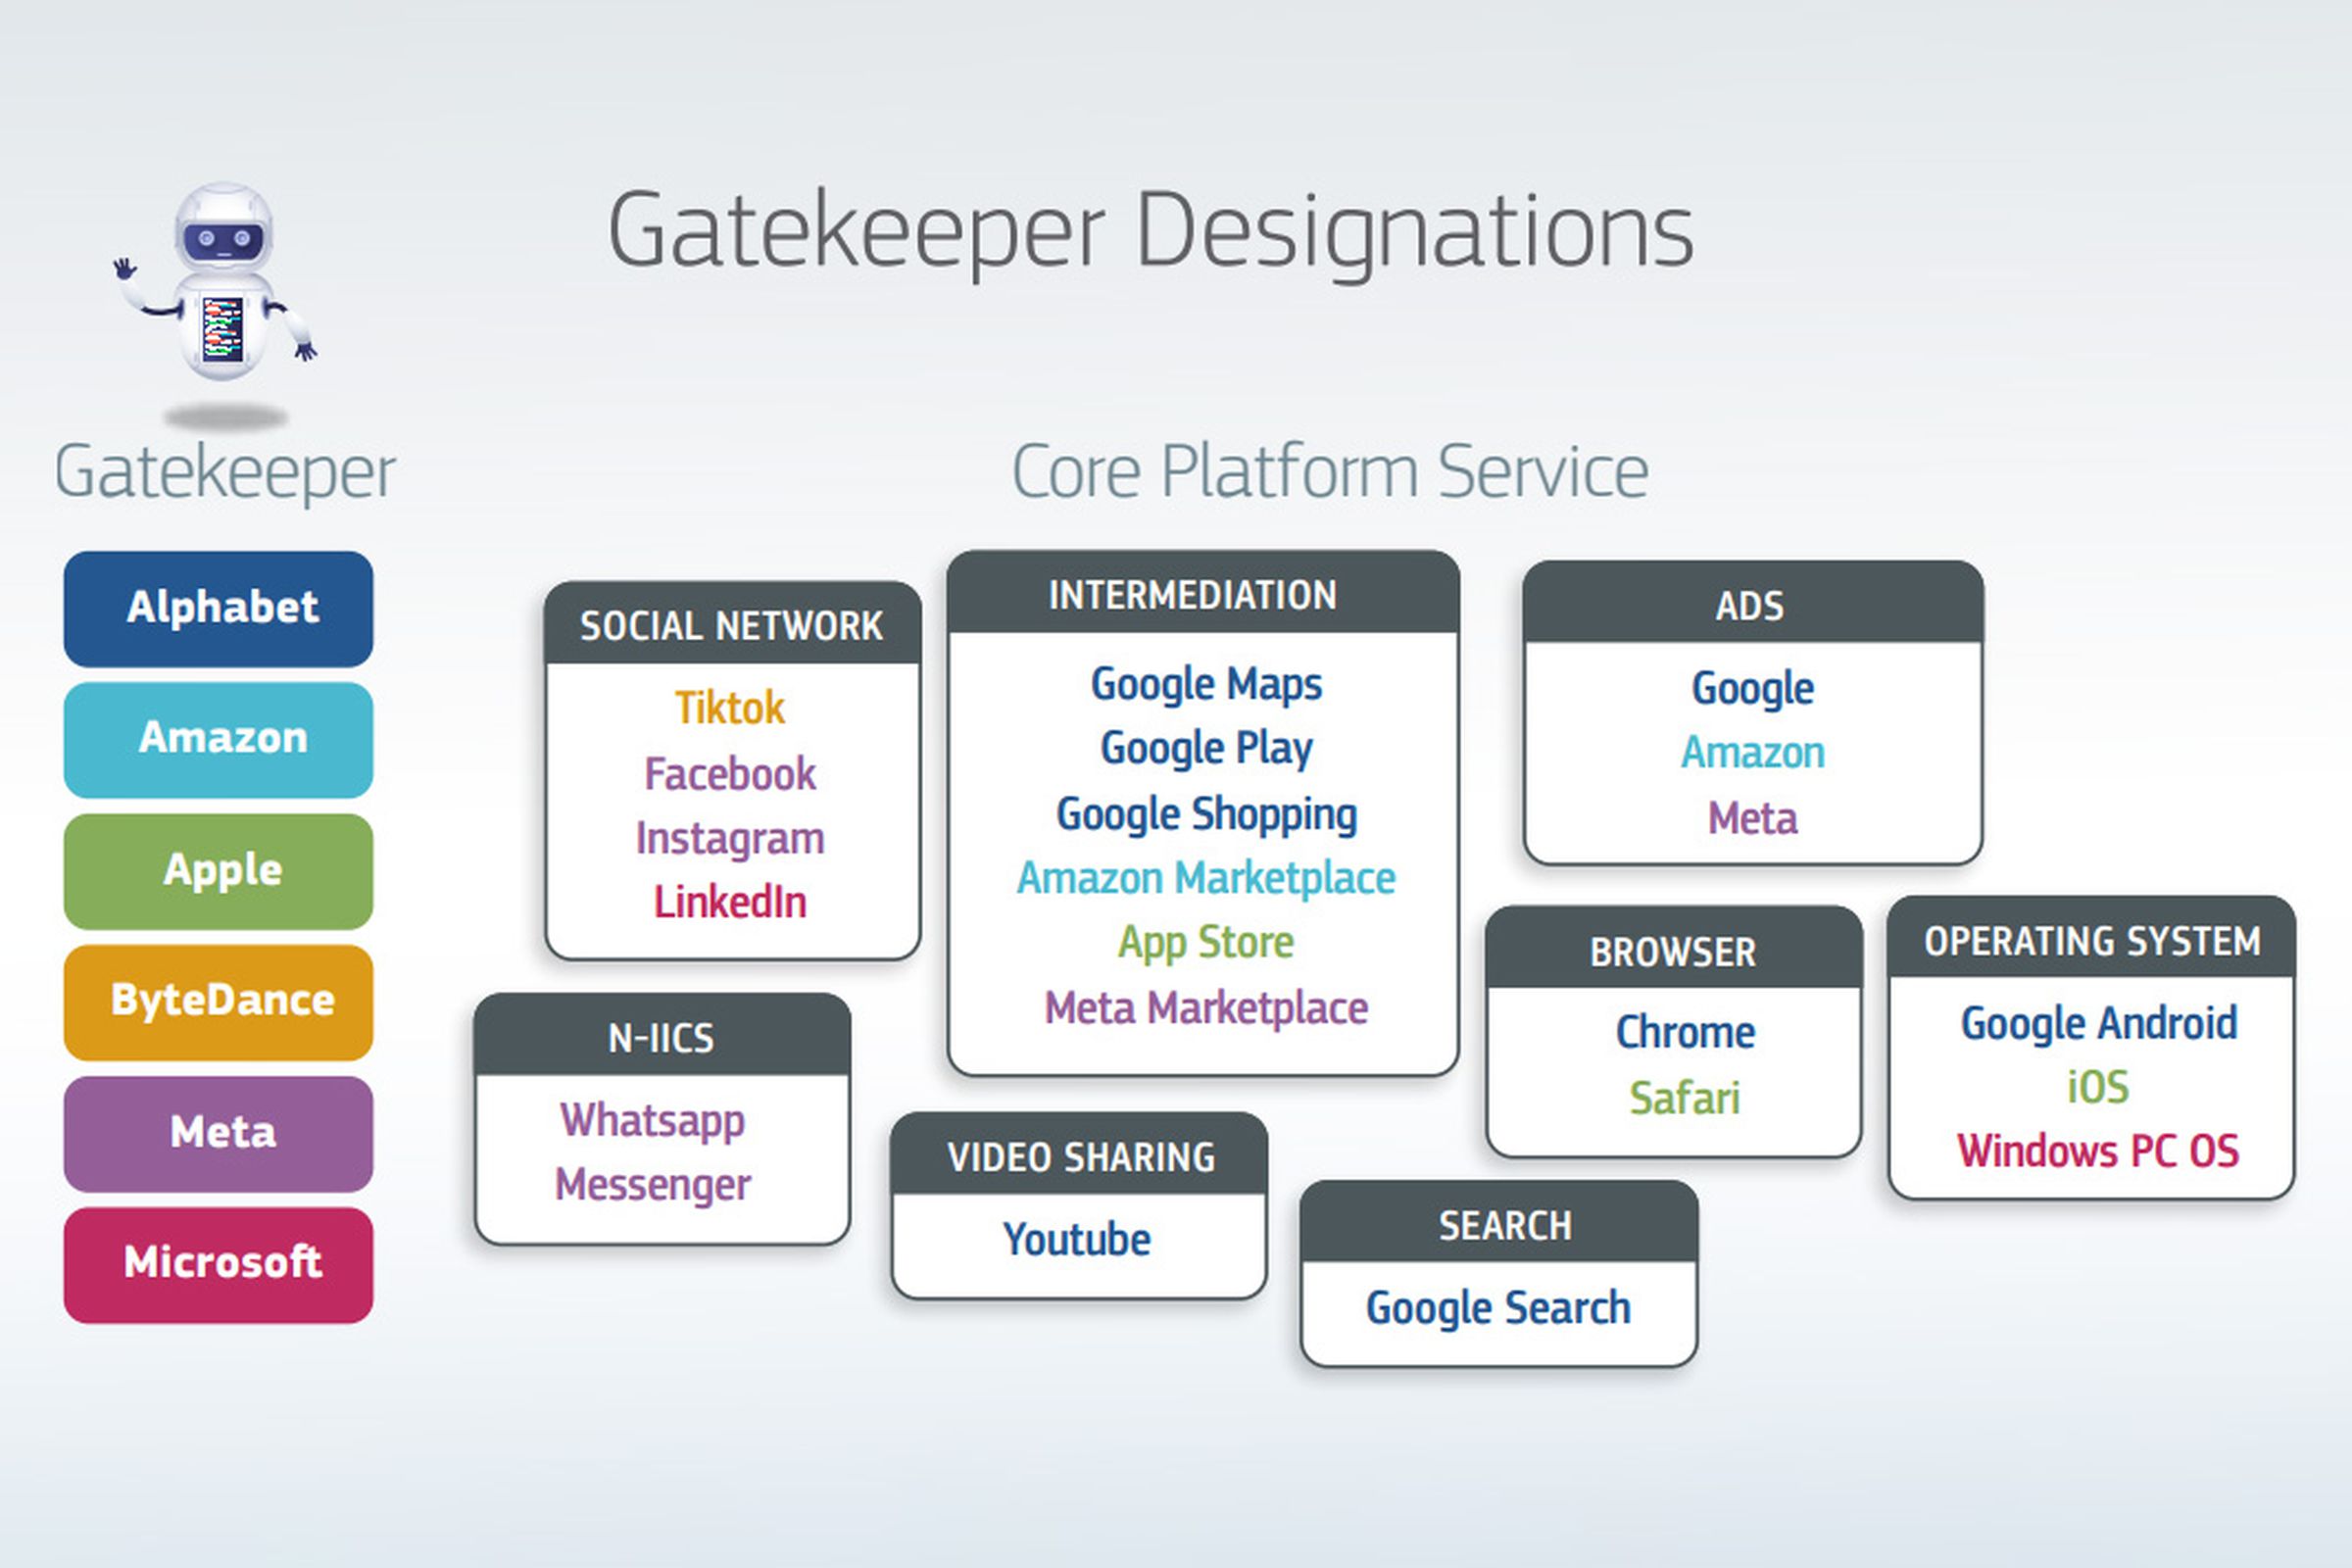 Graphic showing the companies and services being designated as gatekeepers.